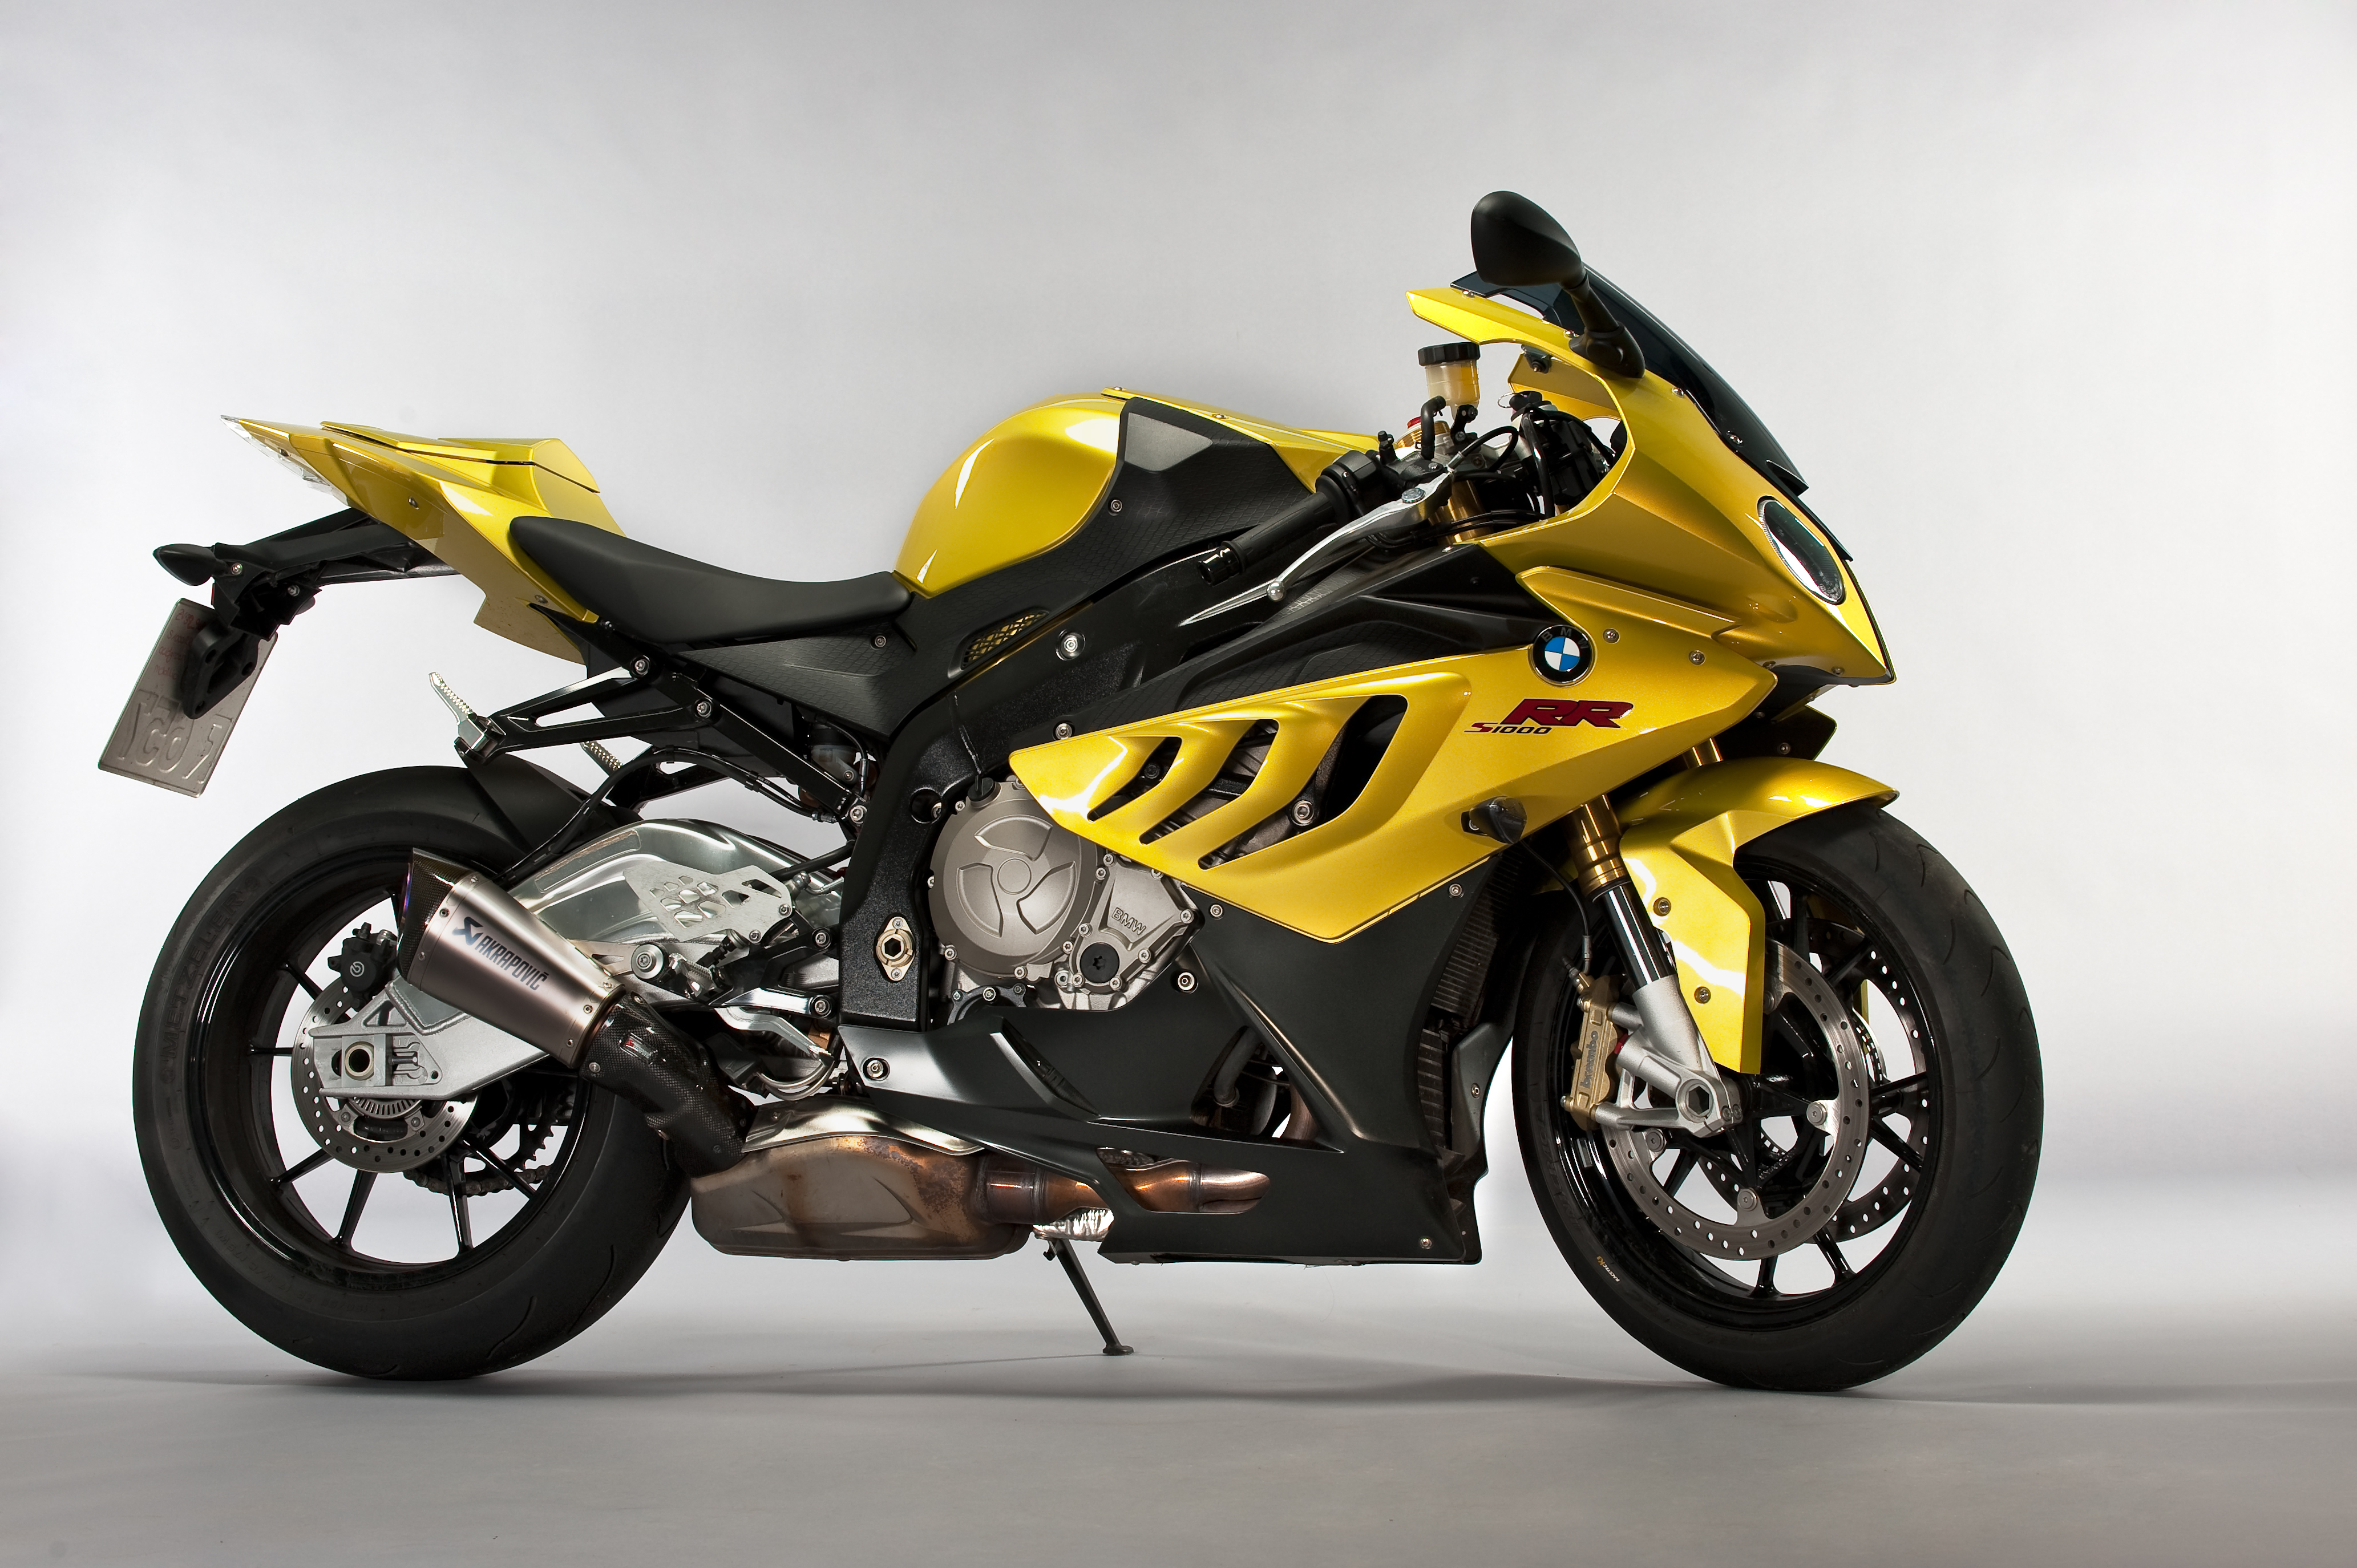 Wikipedia:Featured picture candidates/BMW S1000RR - Wikipedia